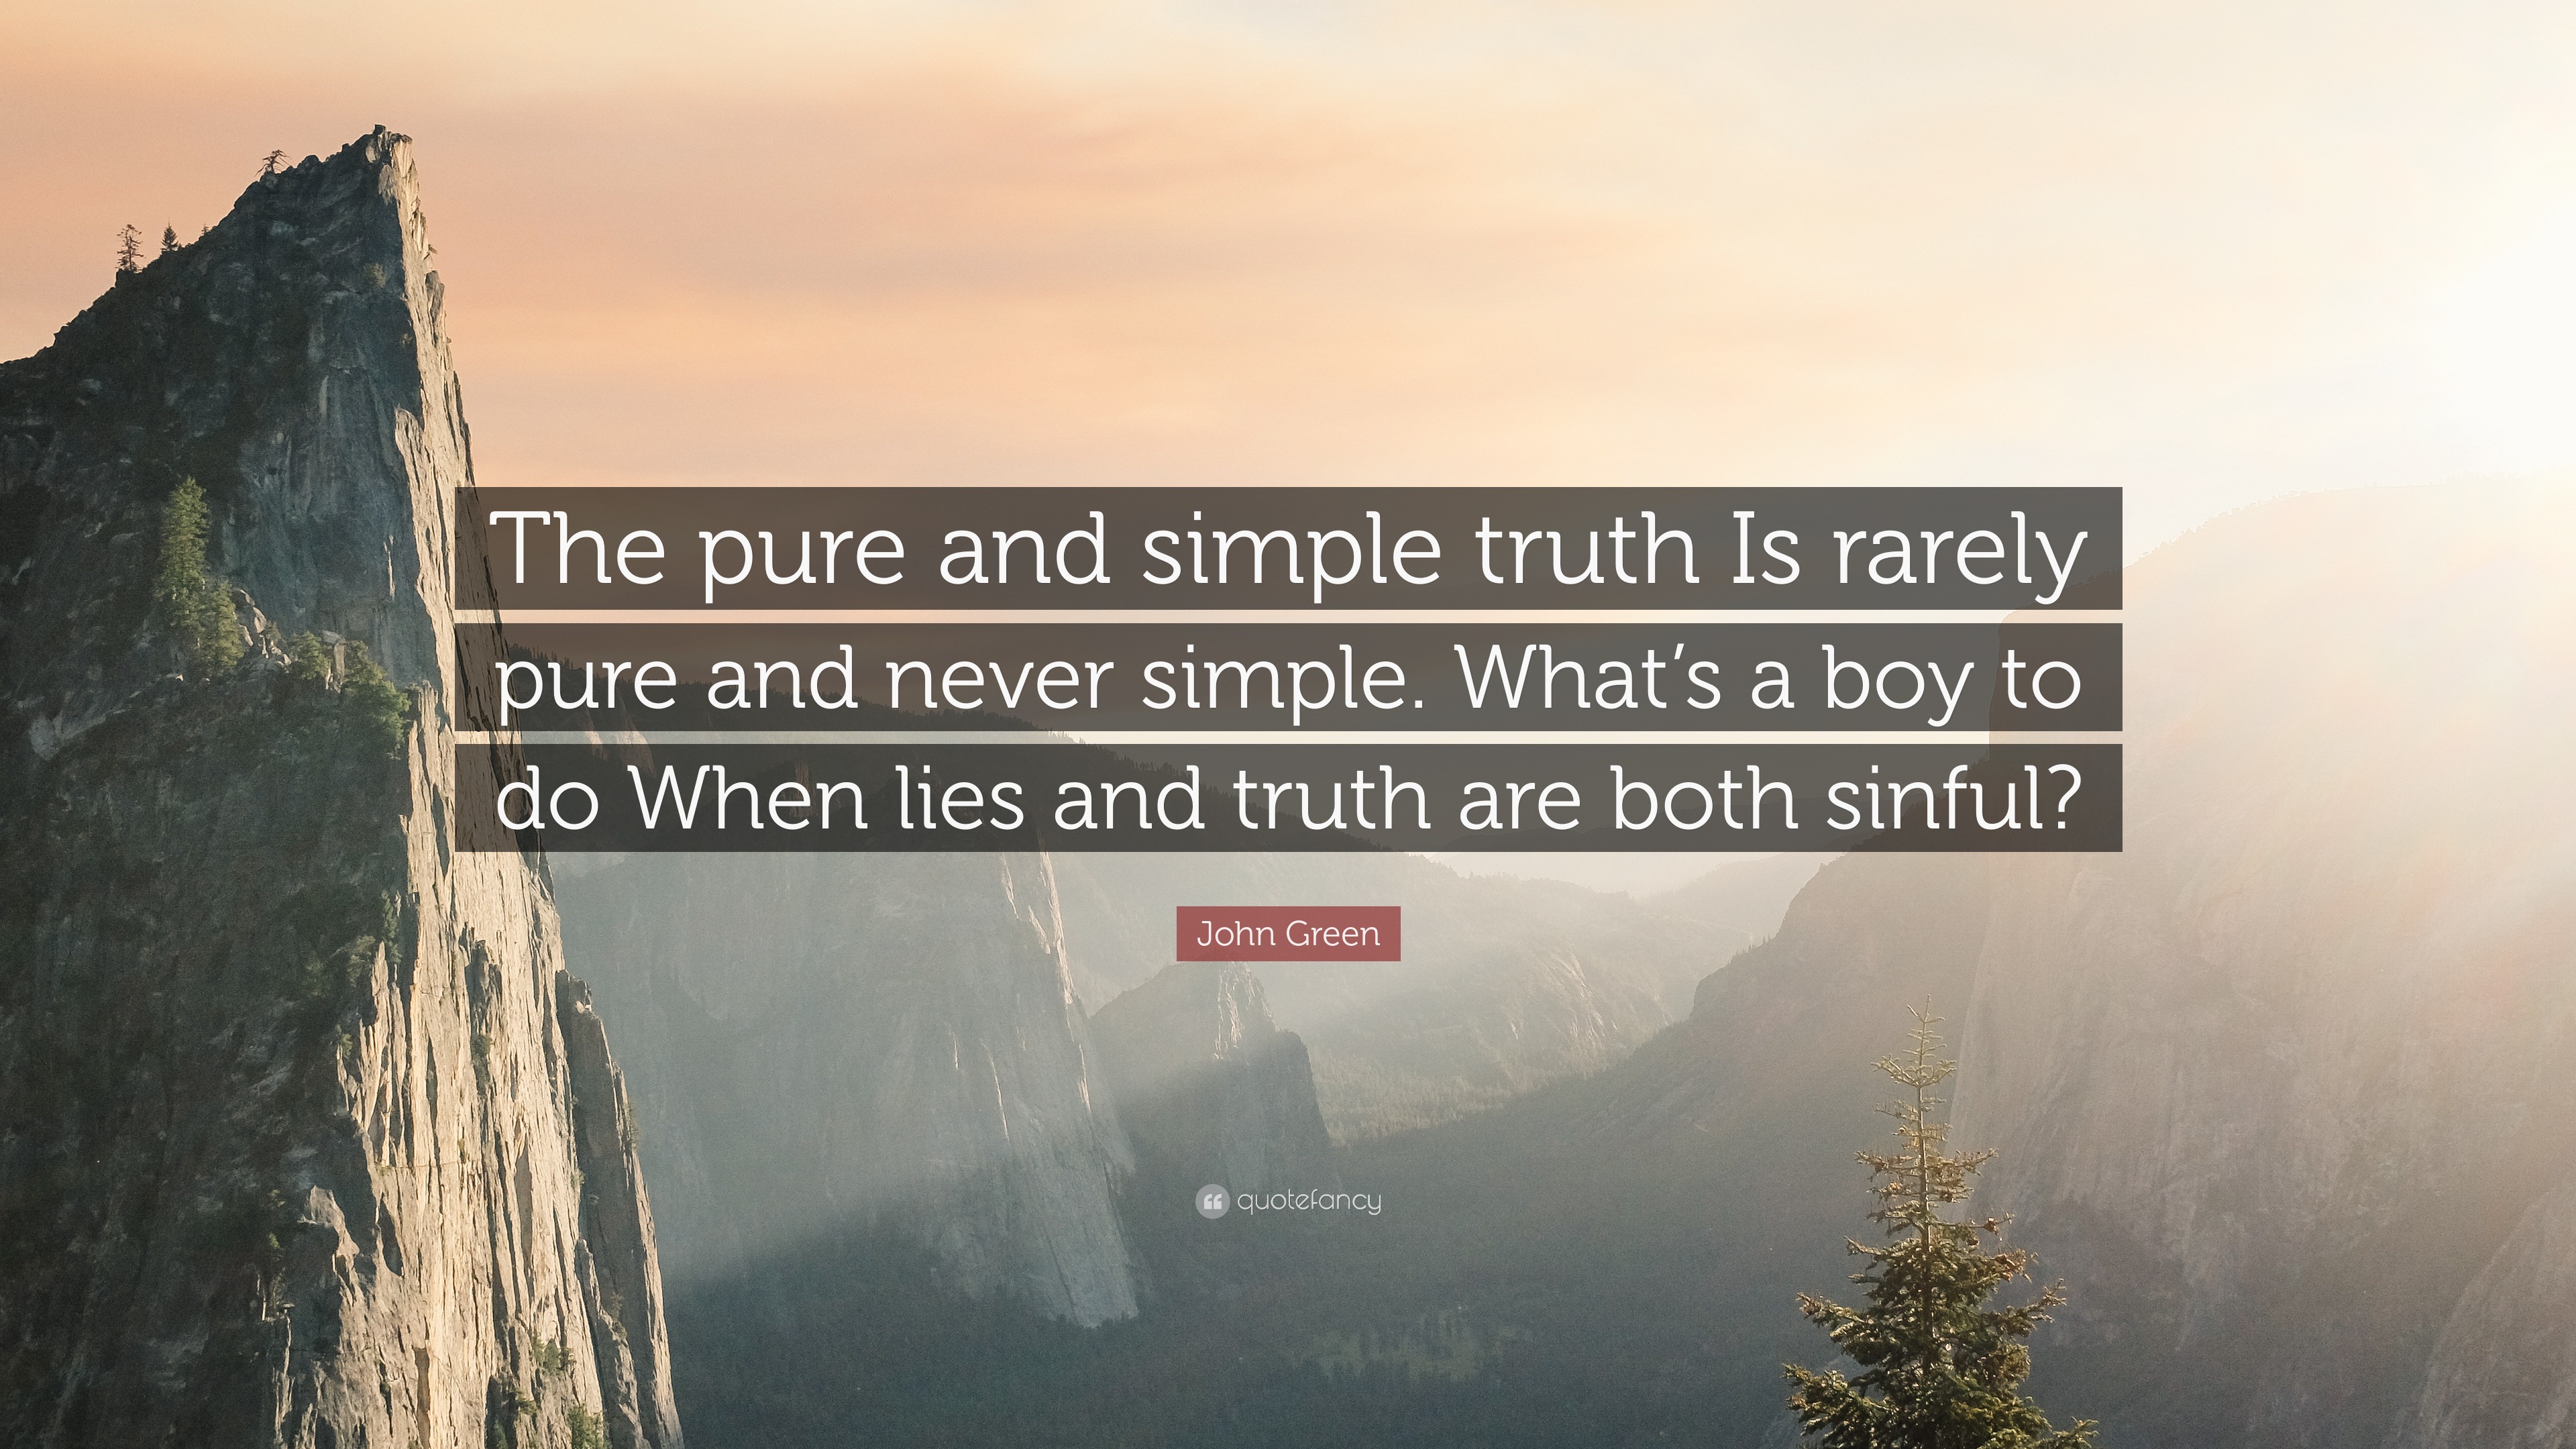 truth is rarely pure and never simple